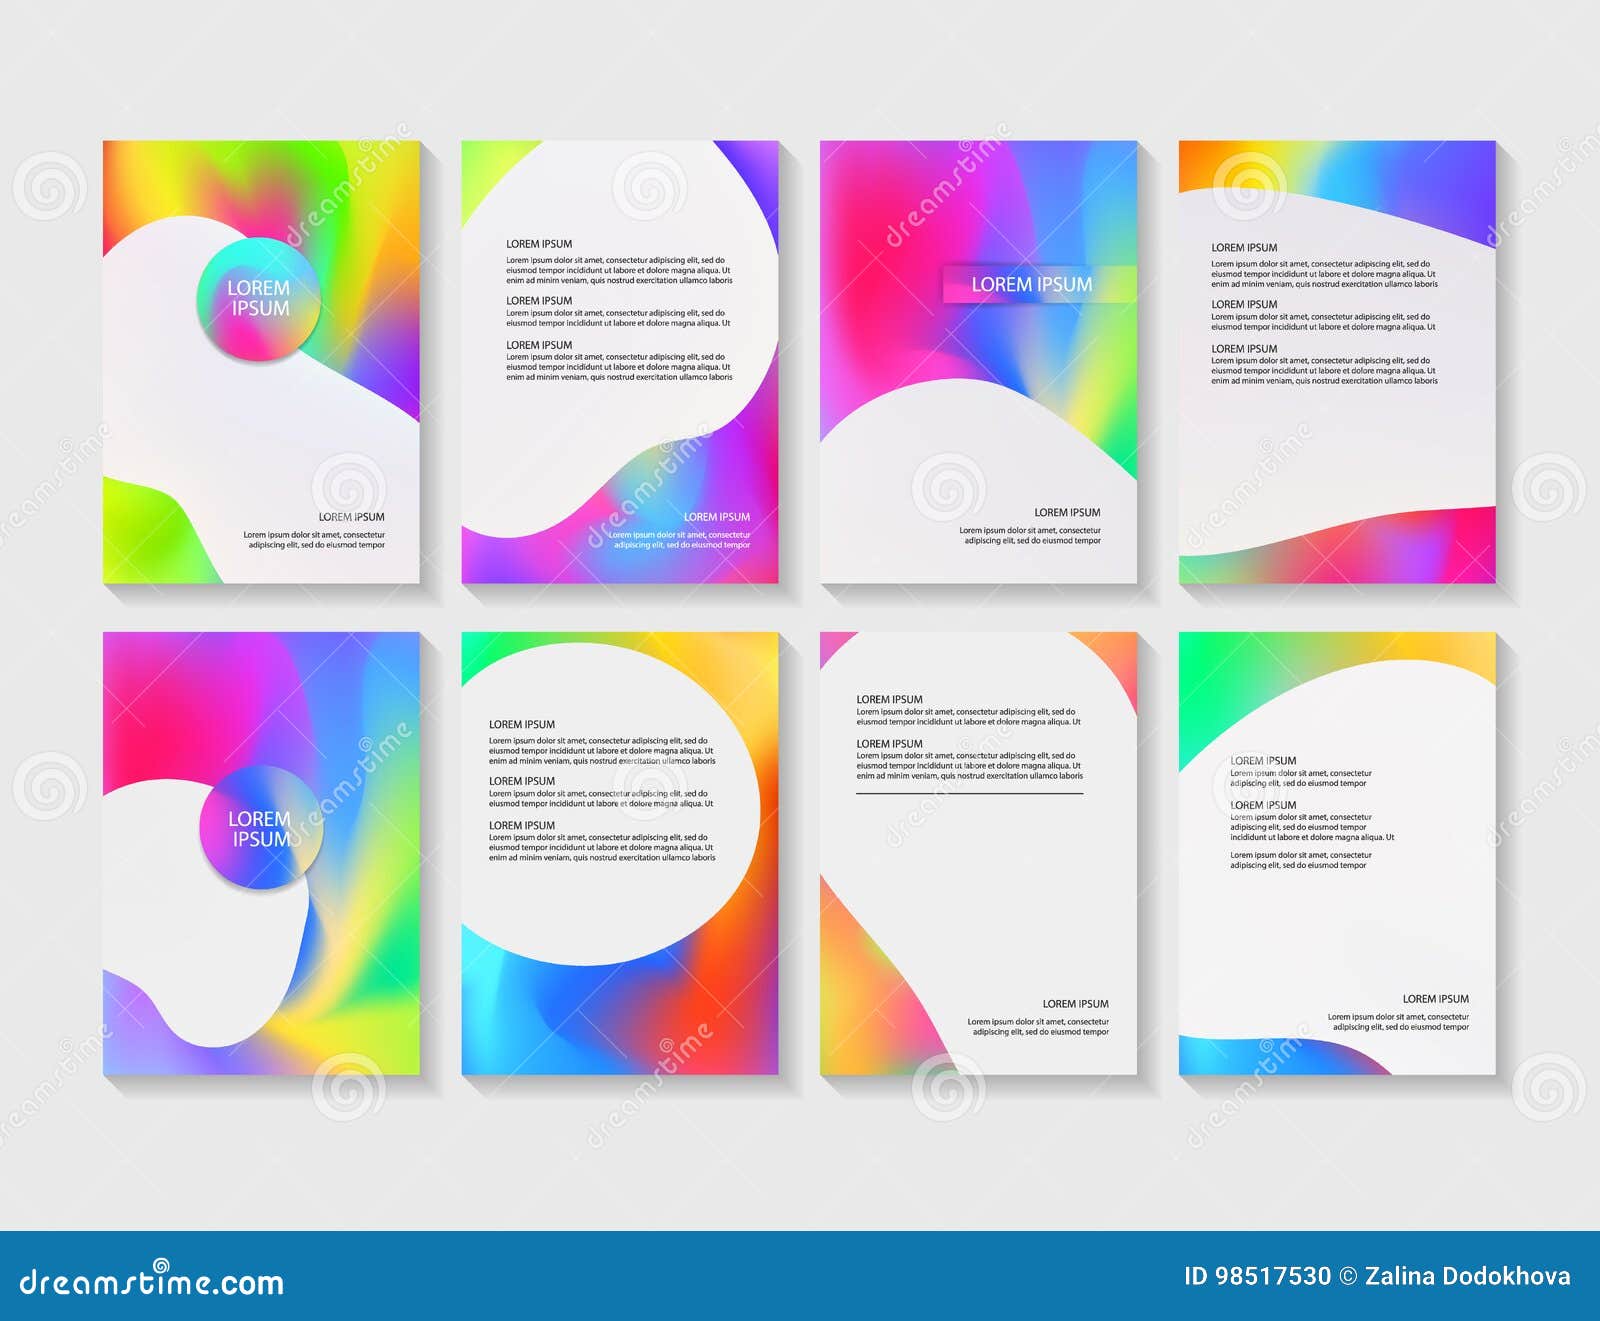 Brochure Flyer Layouts With Abstract Colorful Background Stock Vector Illustration Of Isolated Backgrounds